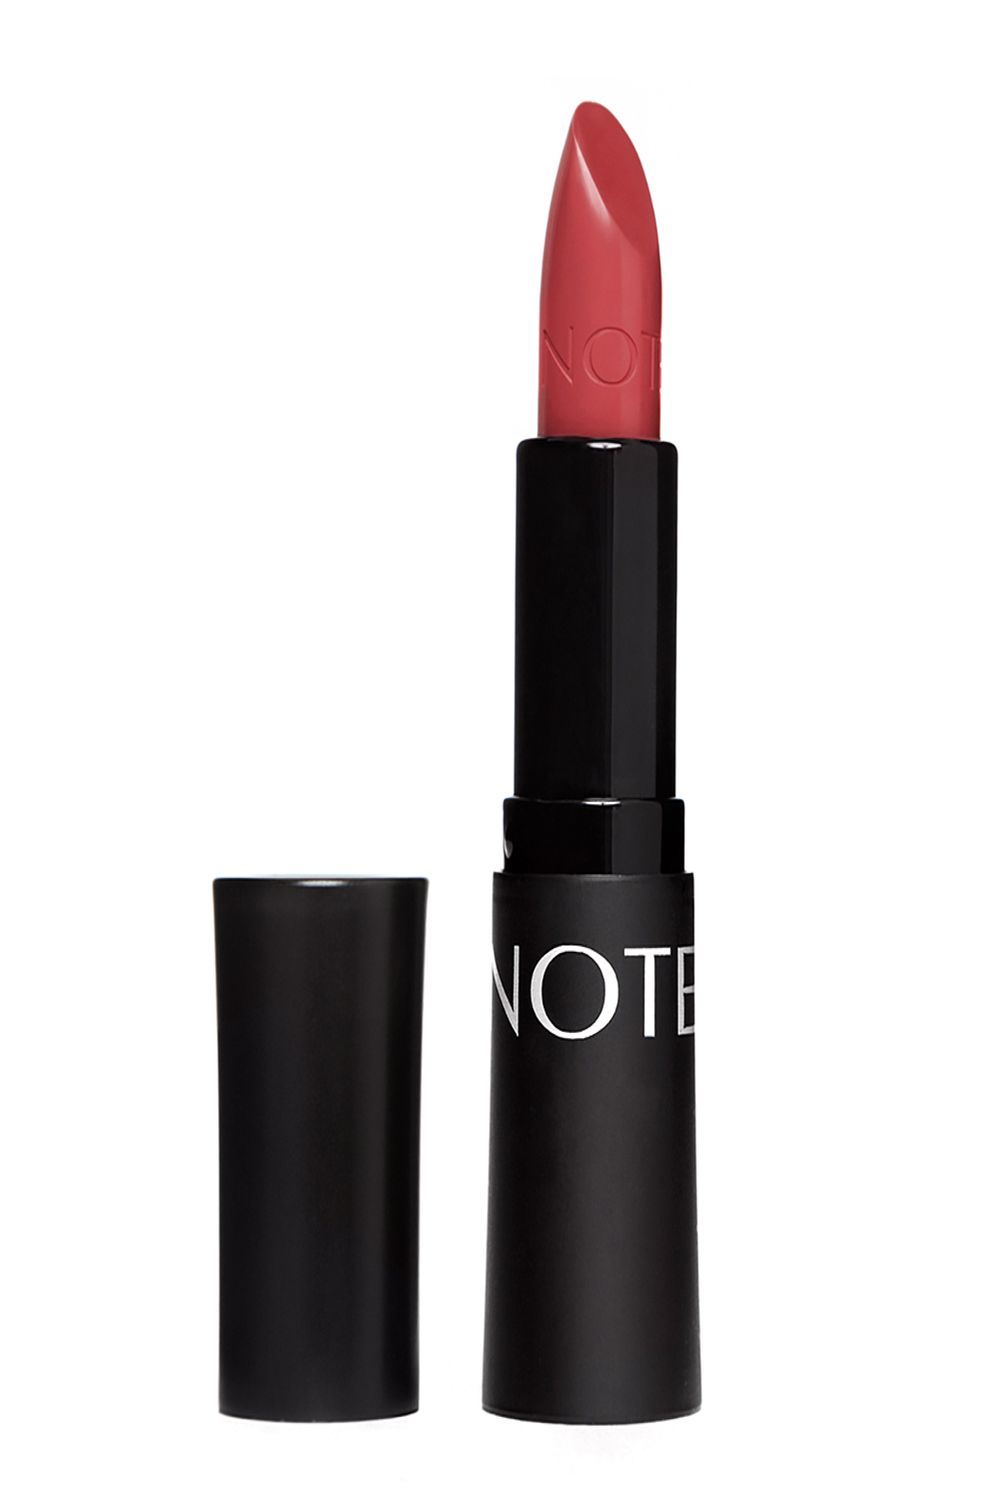 Buy NOTE ULTRA RICH COLOR LIPSTICK 08(Brownie Pink) - Purplle